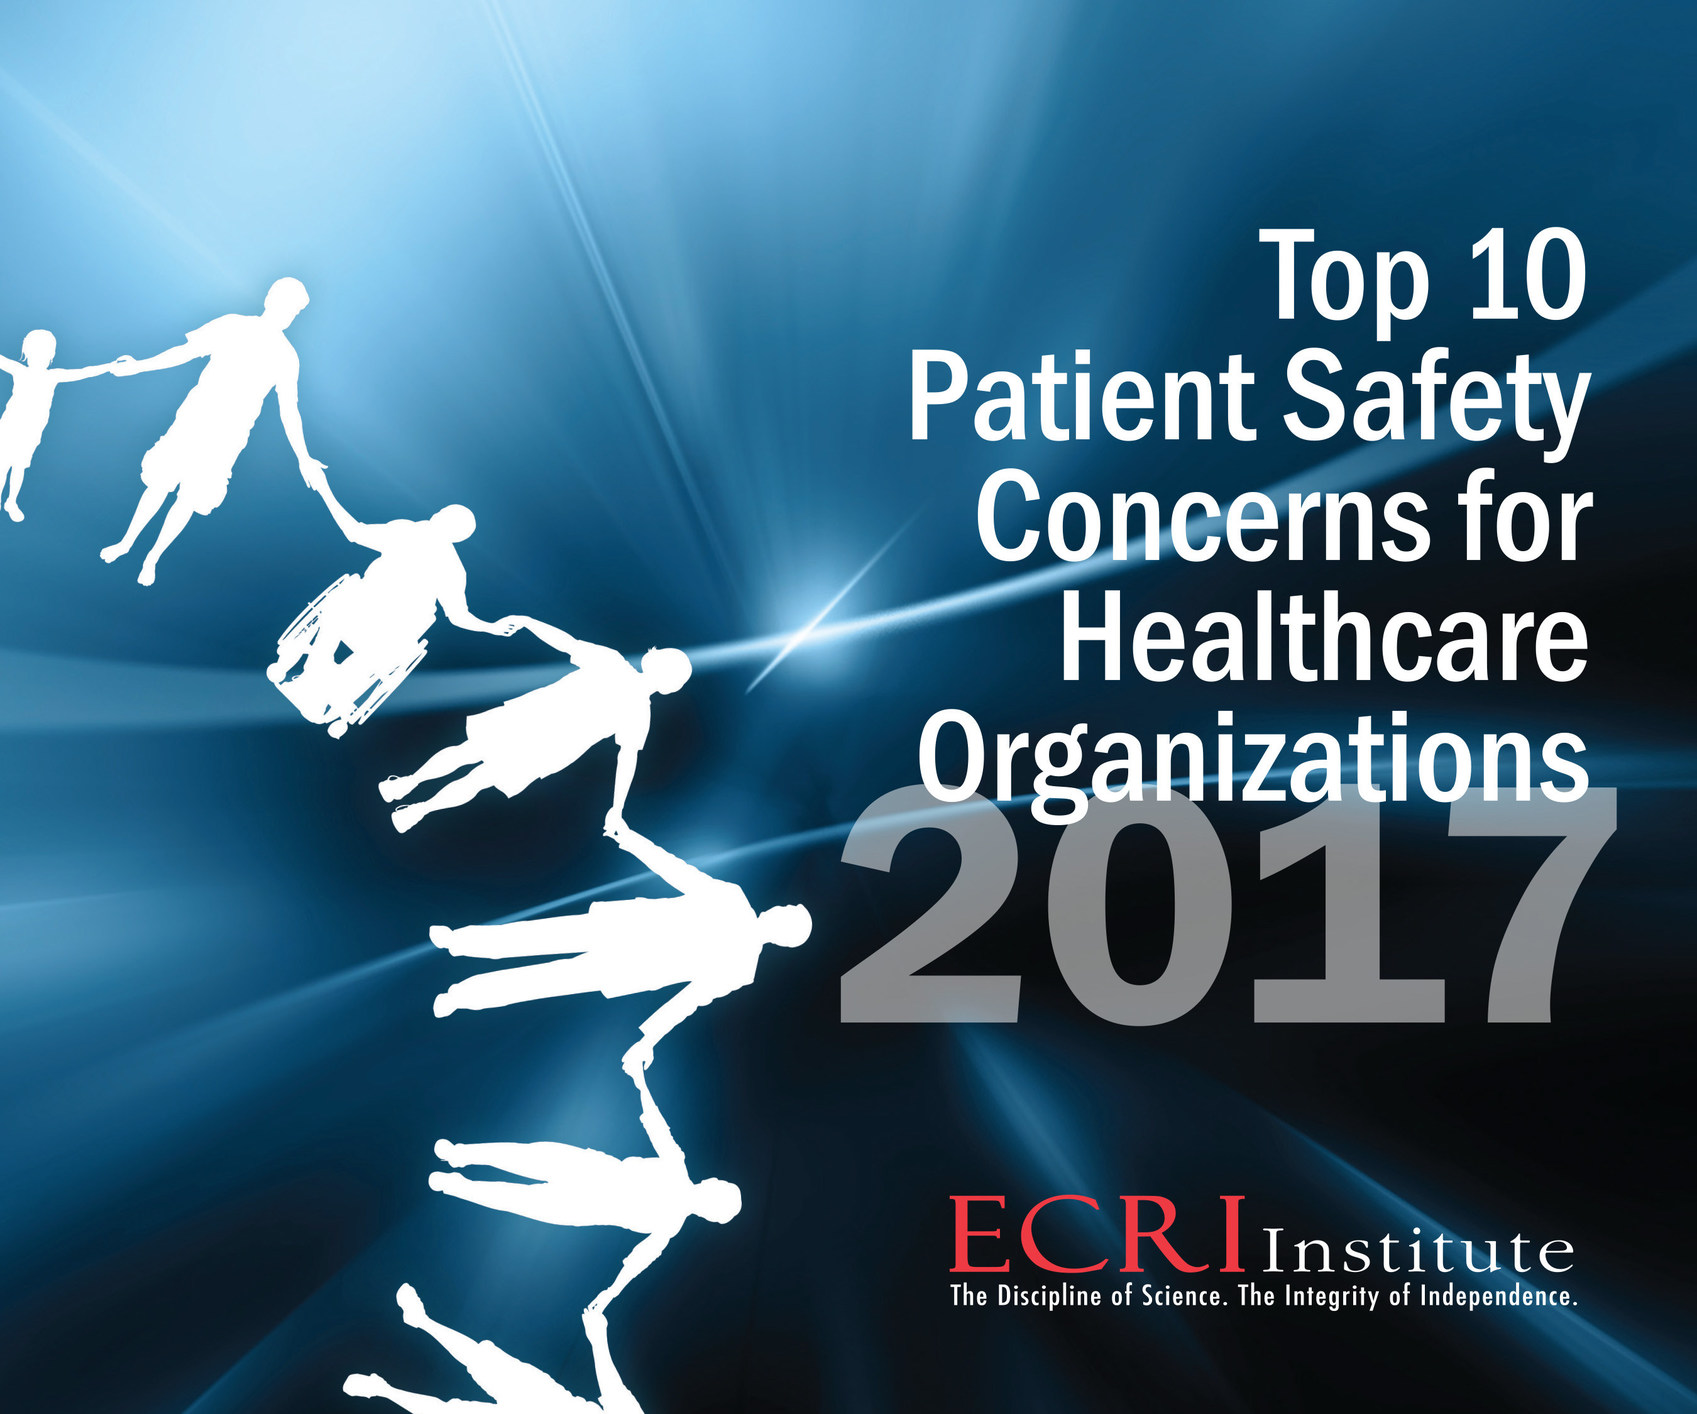 ECRI Institute Names Top 10 Patient Safety Concerns for 2017